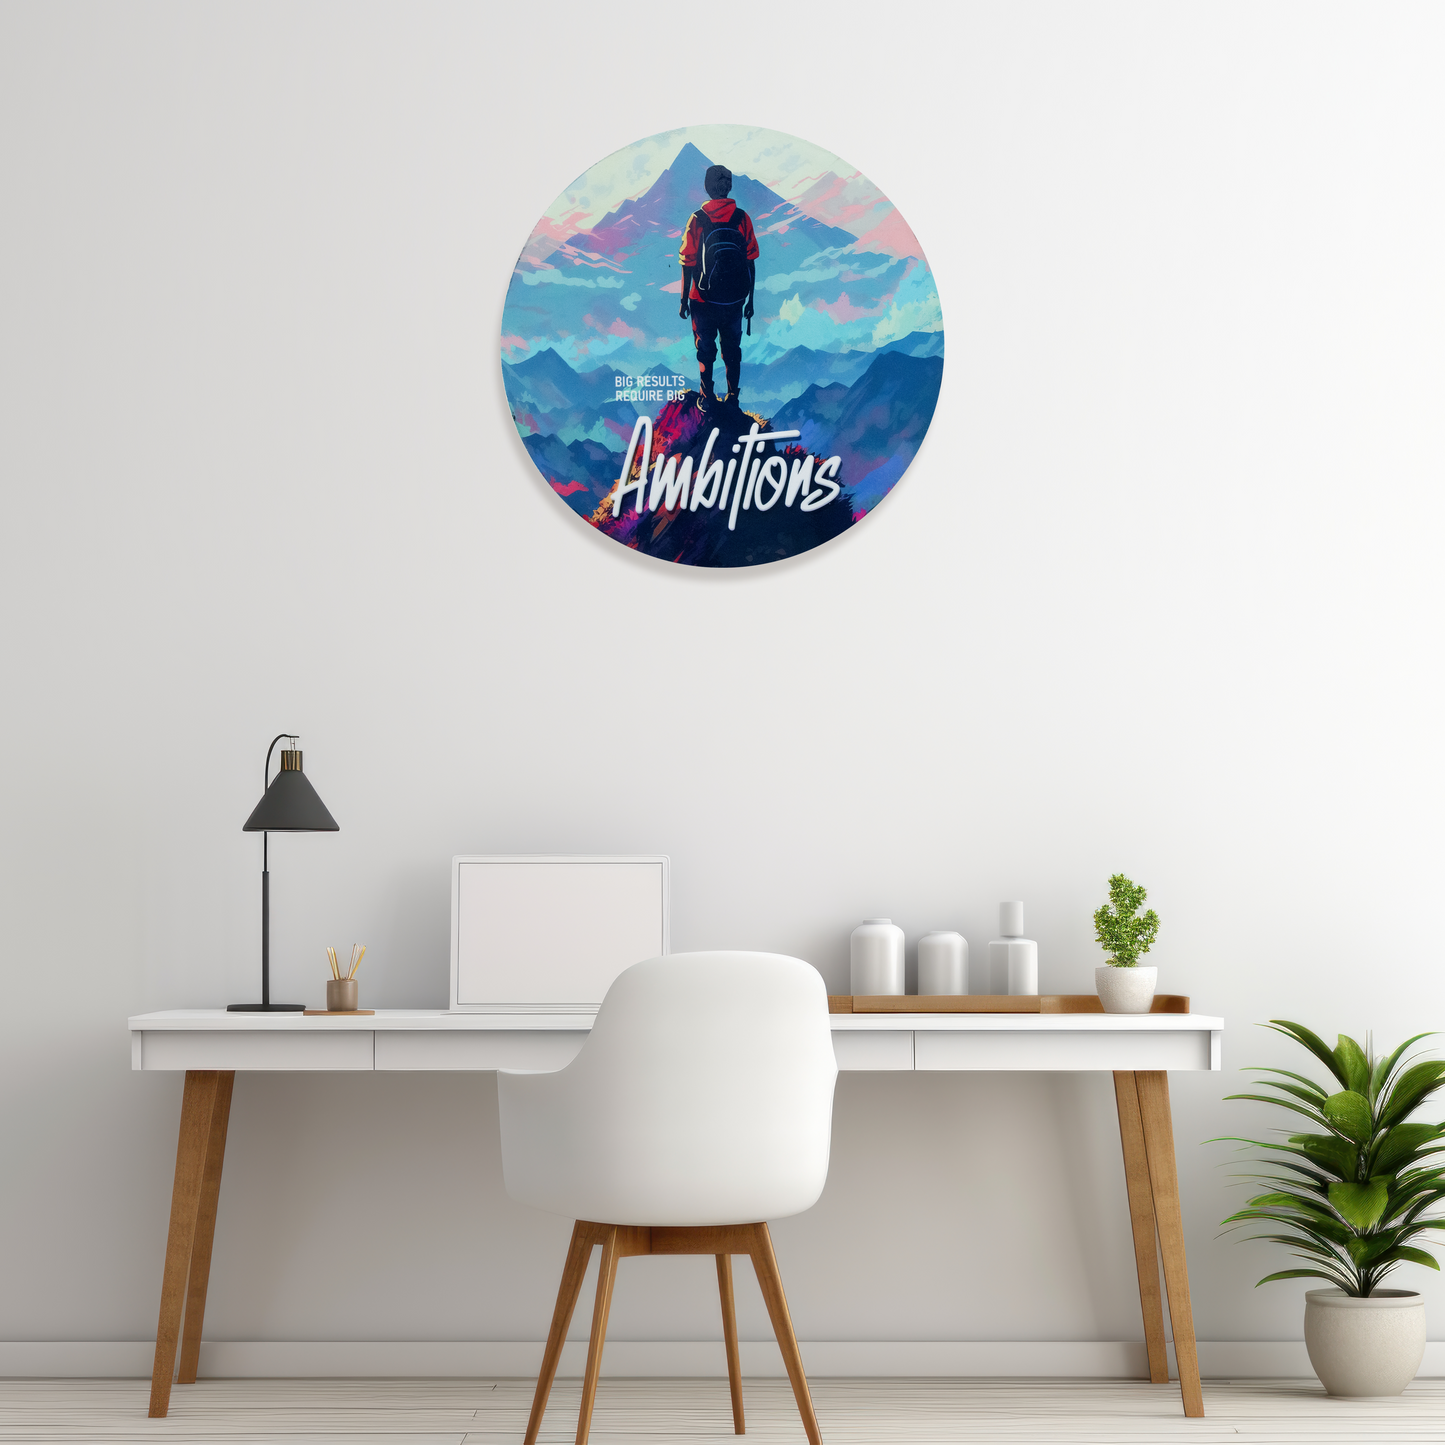 Wall Painting - Digital painting - Ambitions - Home Decor - Office Decor